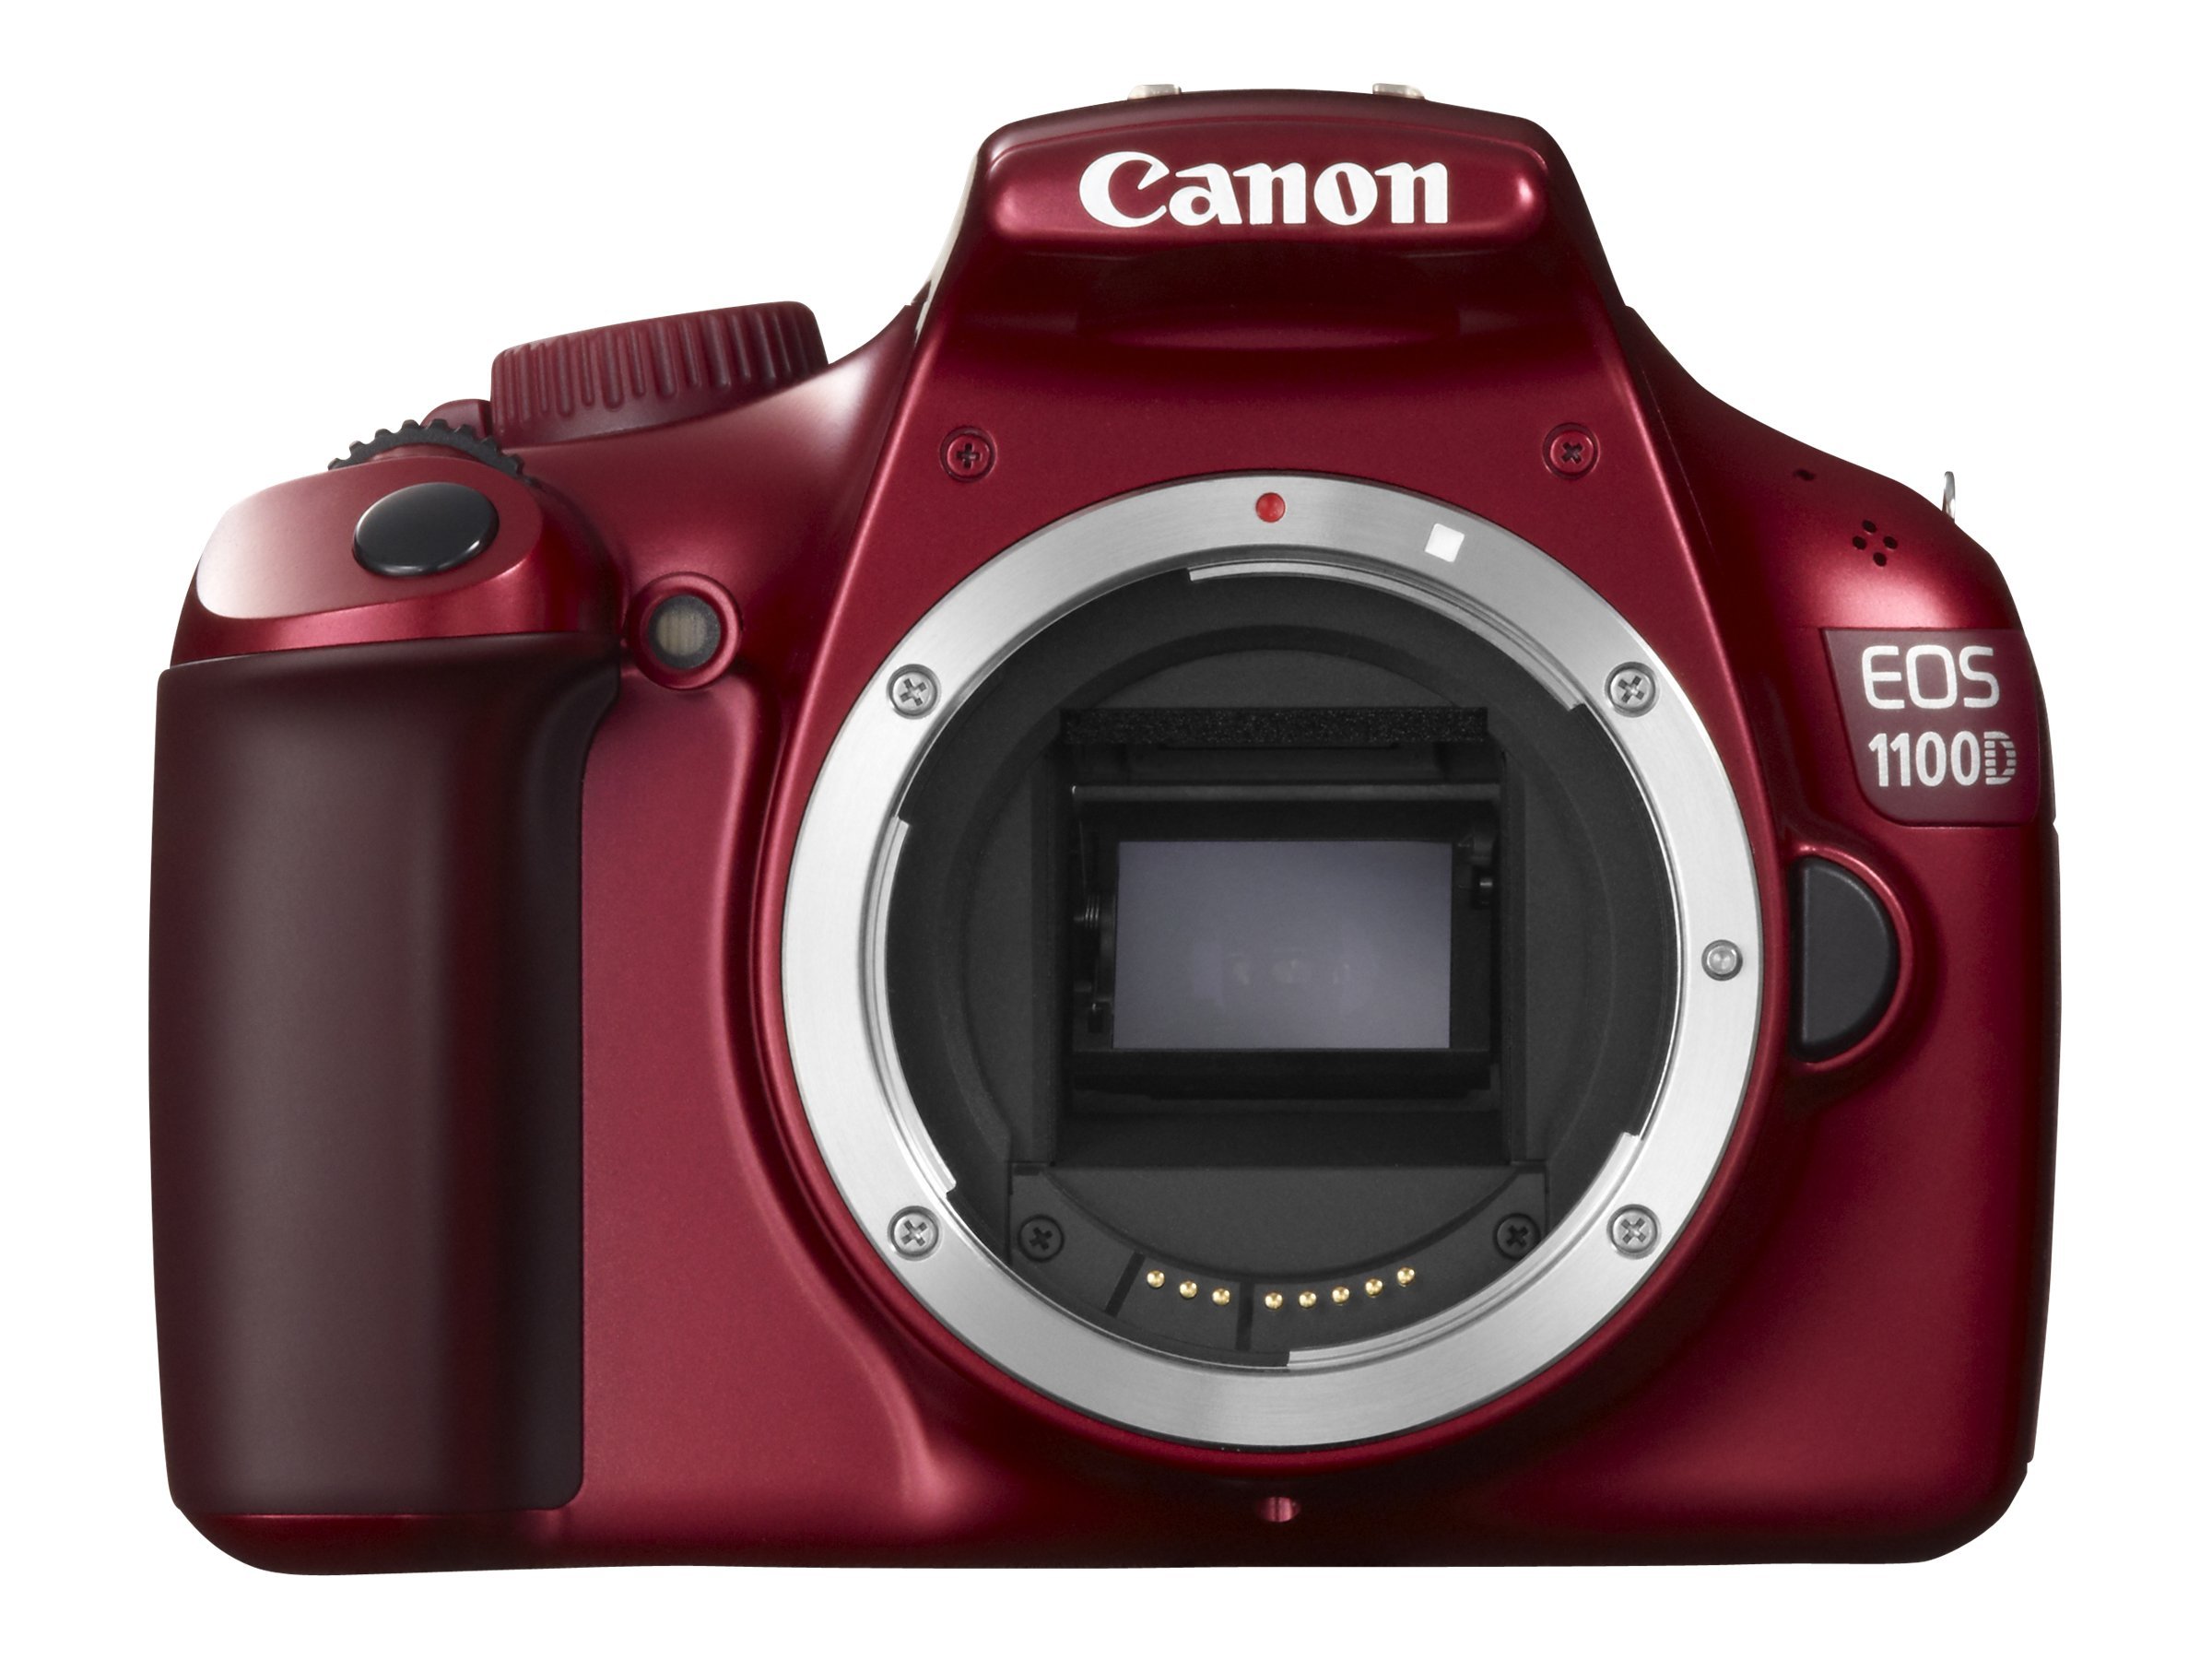 Canon EOS 1100D + EF-S 18-55mm IS II - full specs, details and review